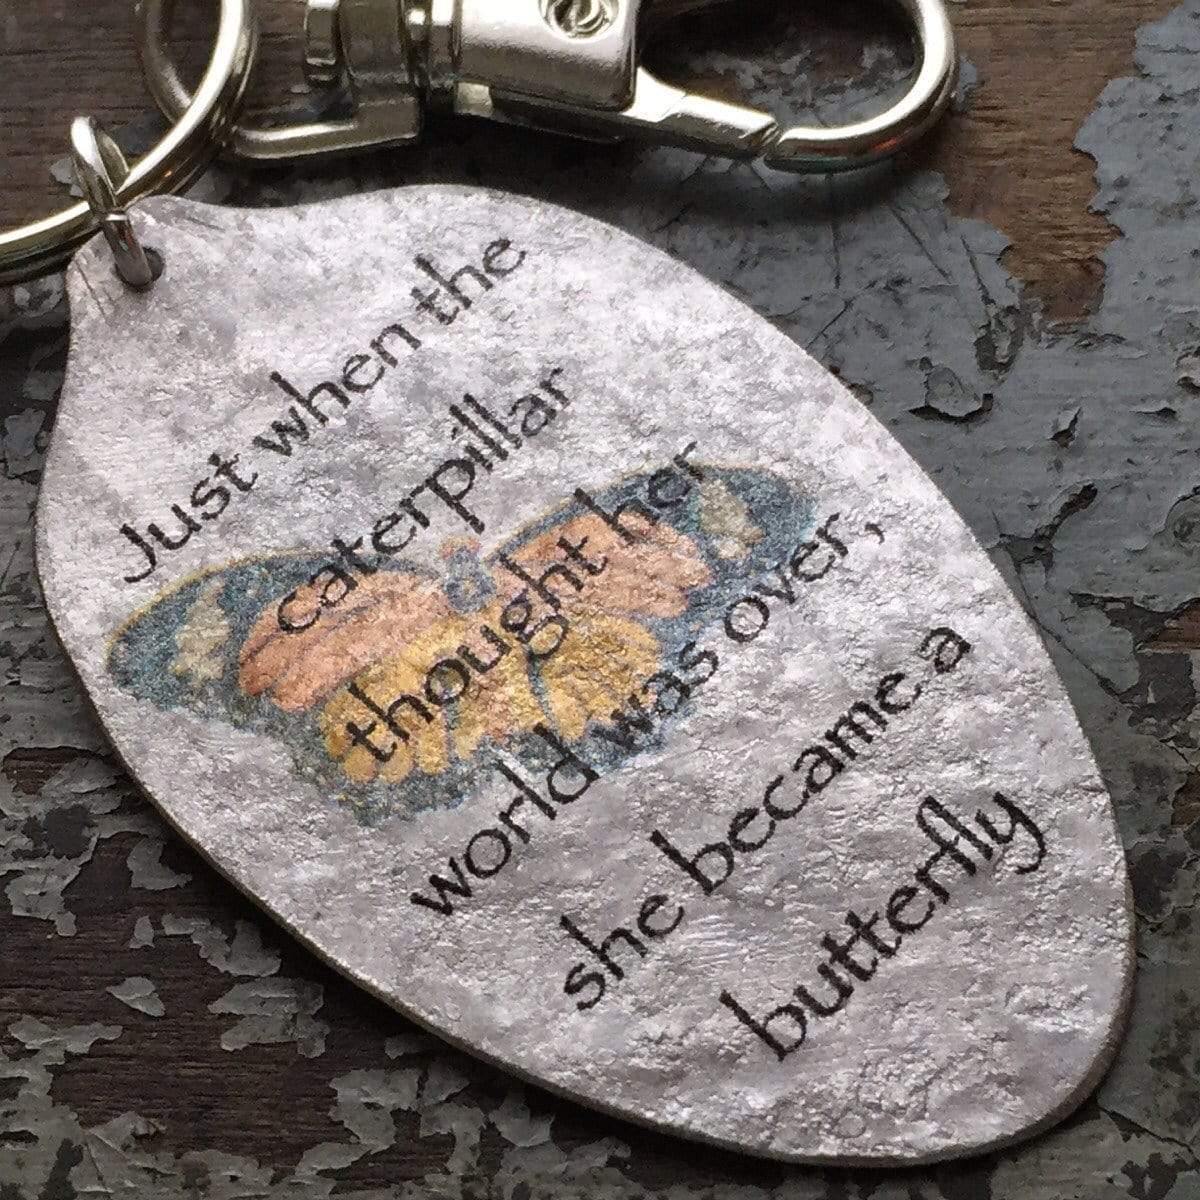 Just when the caterpillar thought her world was over, she became a butterfly Keychain, Silverware Jewelry, Spoon Keychain, Inspiring Gift - KyleeMae Designs